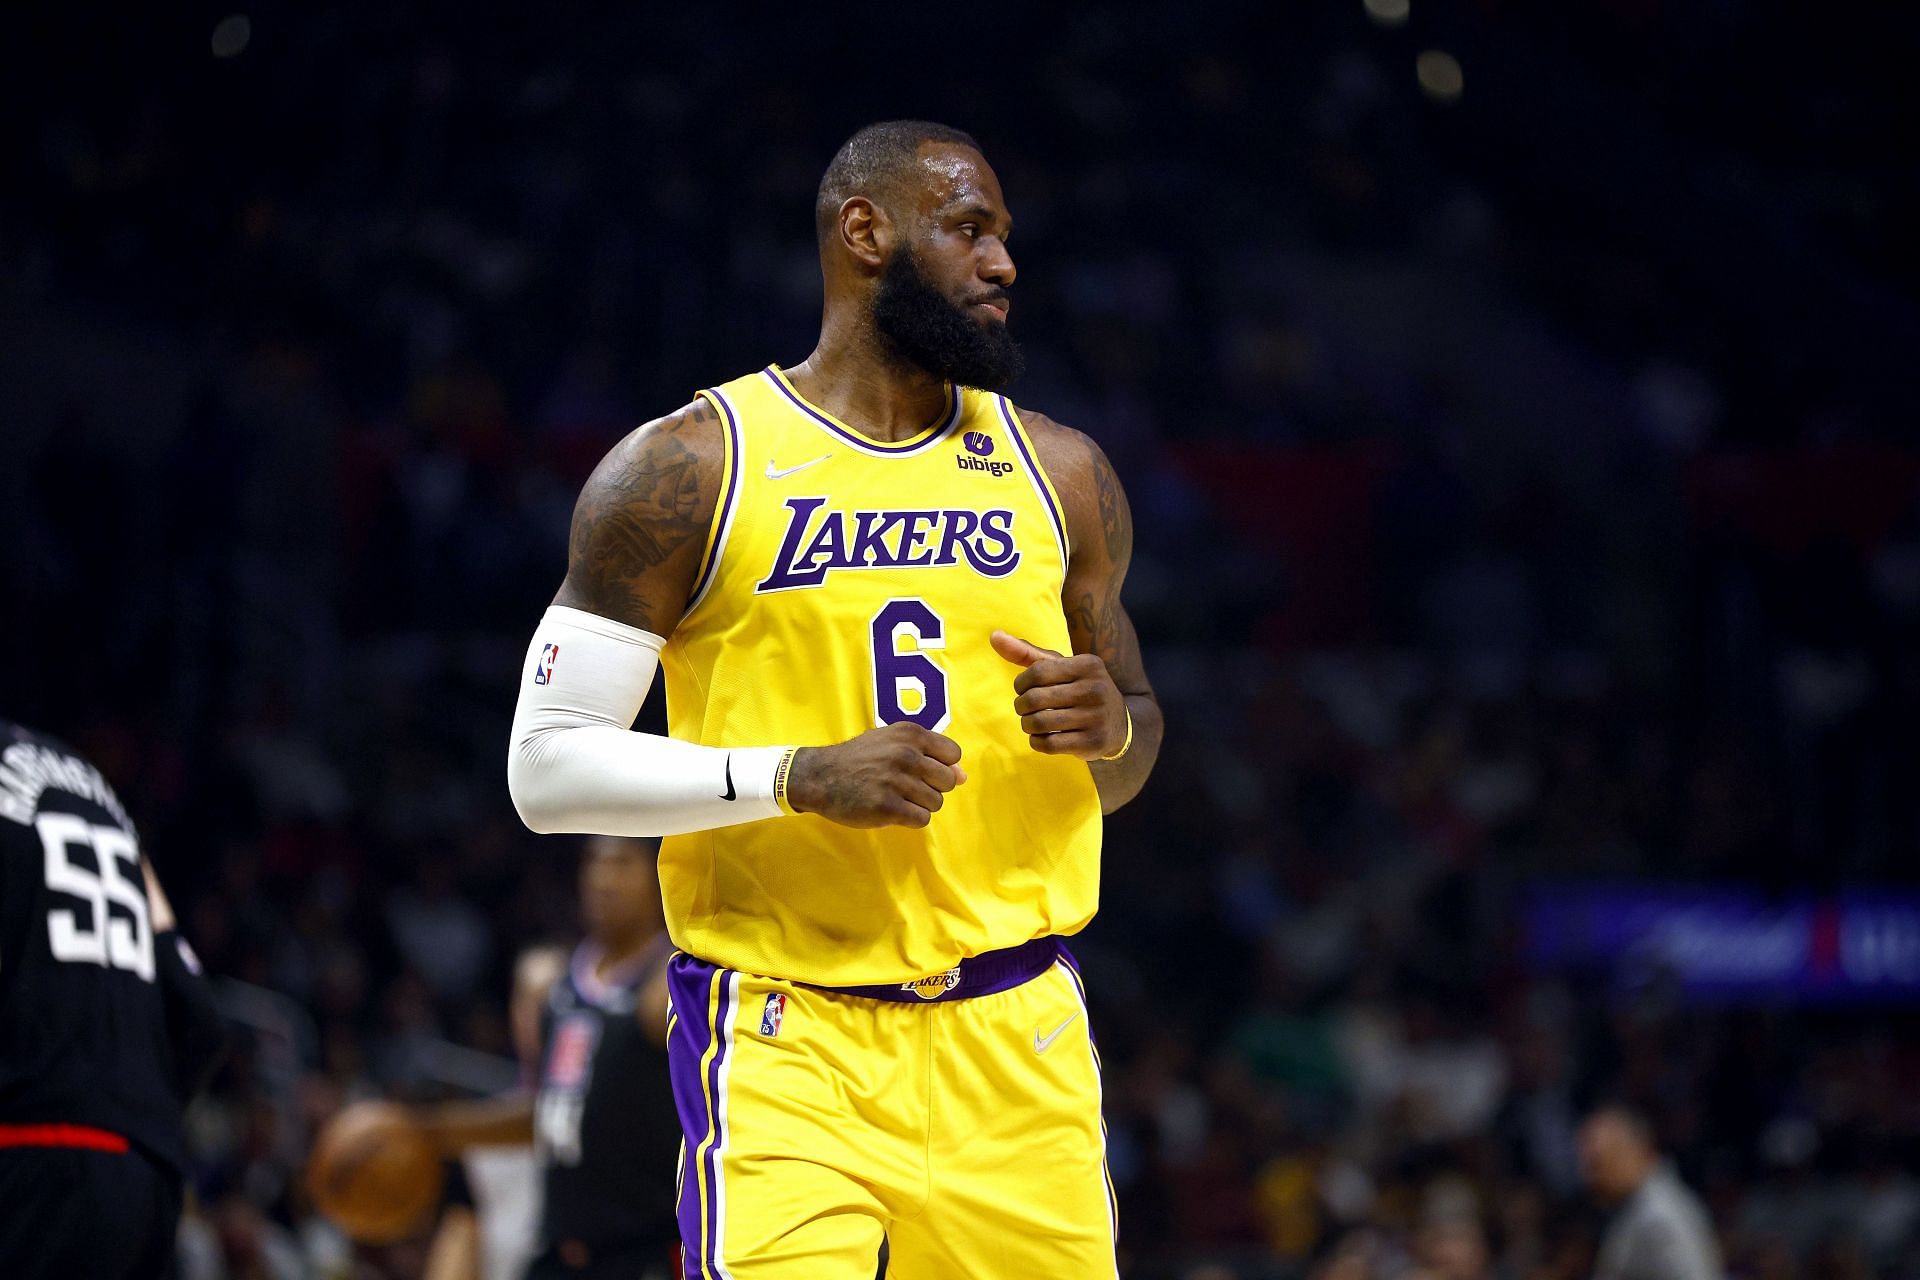 LeBron James #6 of the Los Angeles Lakers at Crypto.com Arena on March 03, 2022 in Los Angeles, California.